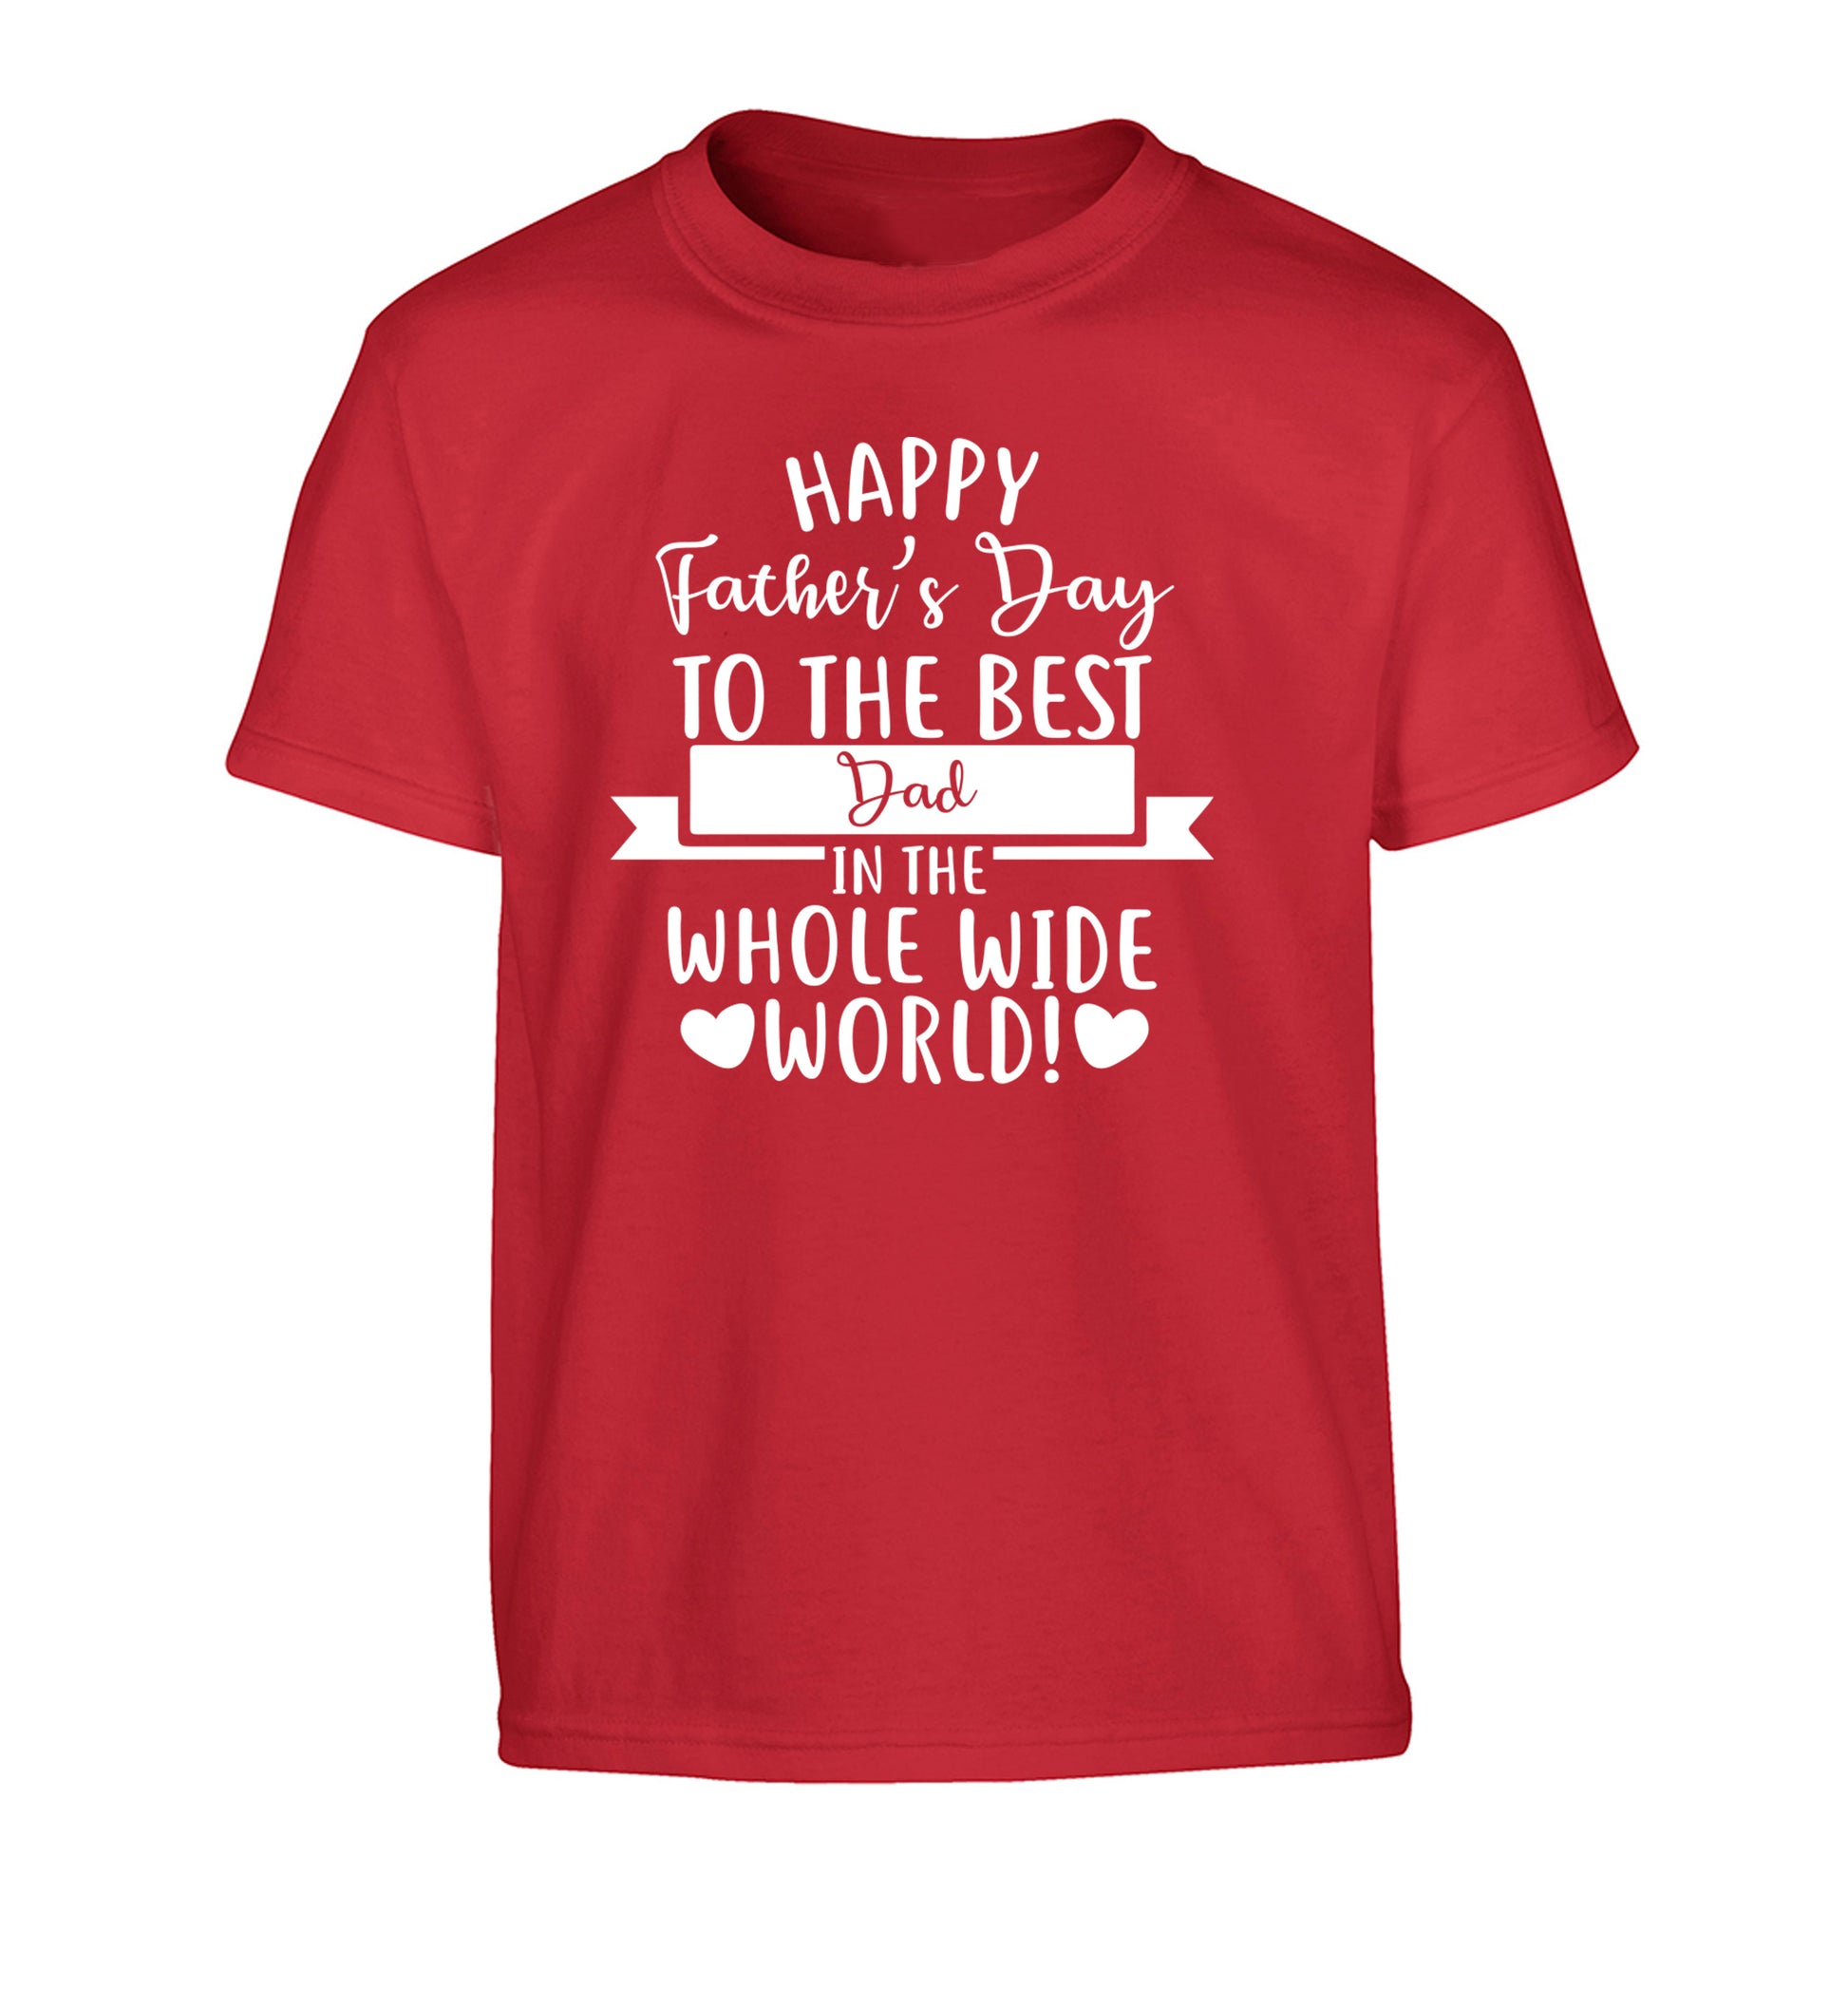 Happy Father's Day to the best father in the world! Children's red Tshirt 12-13 Years